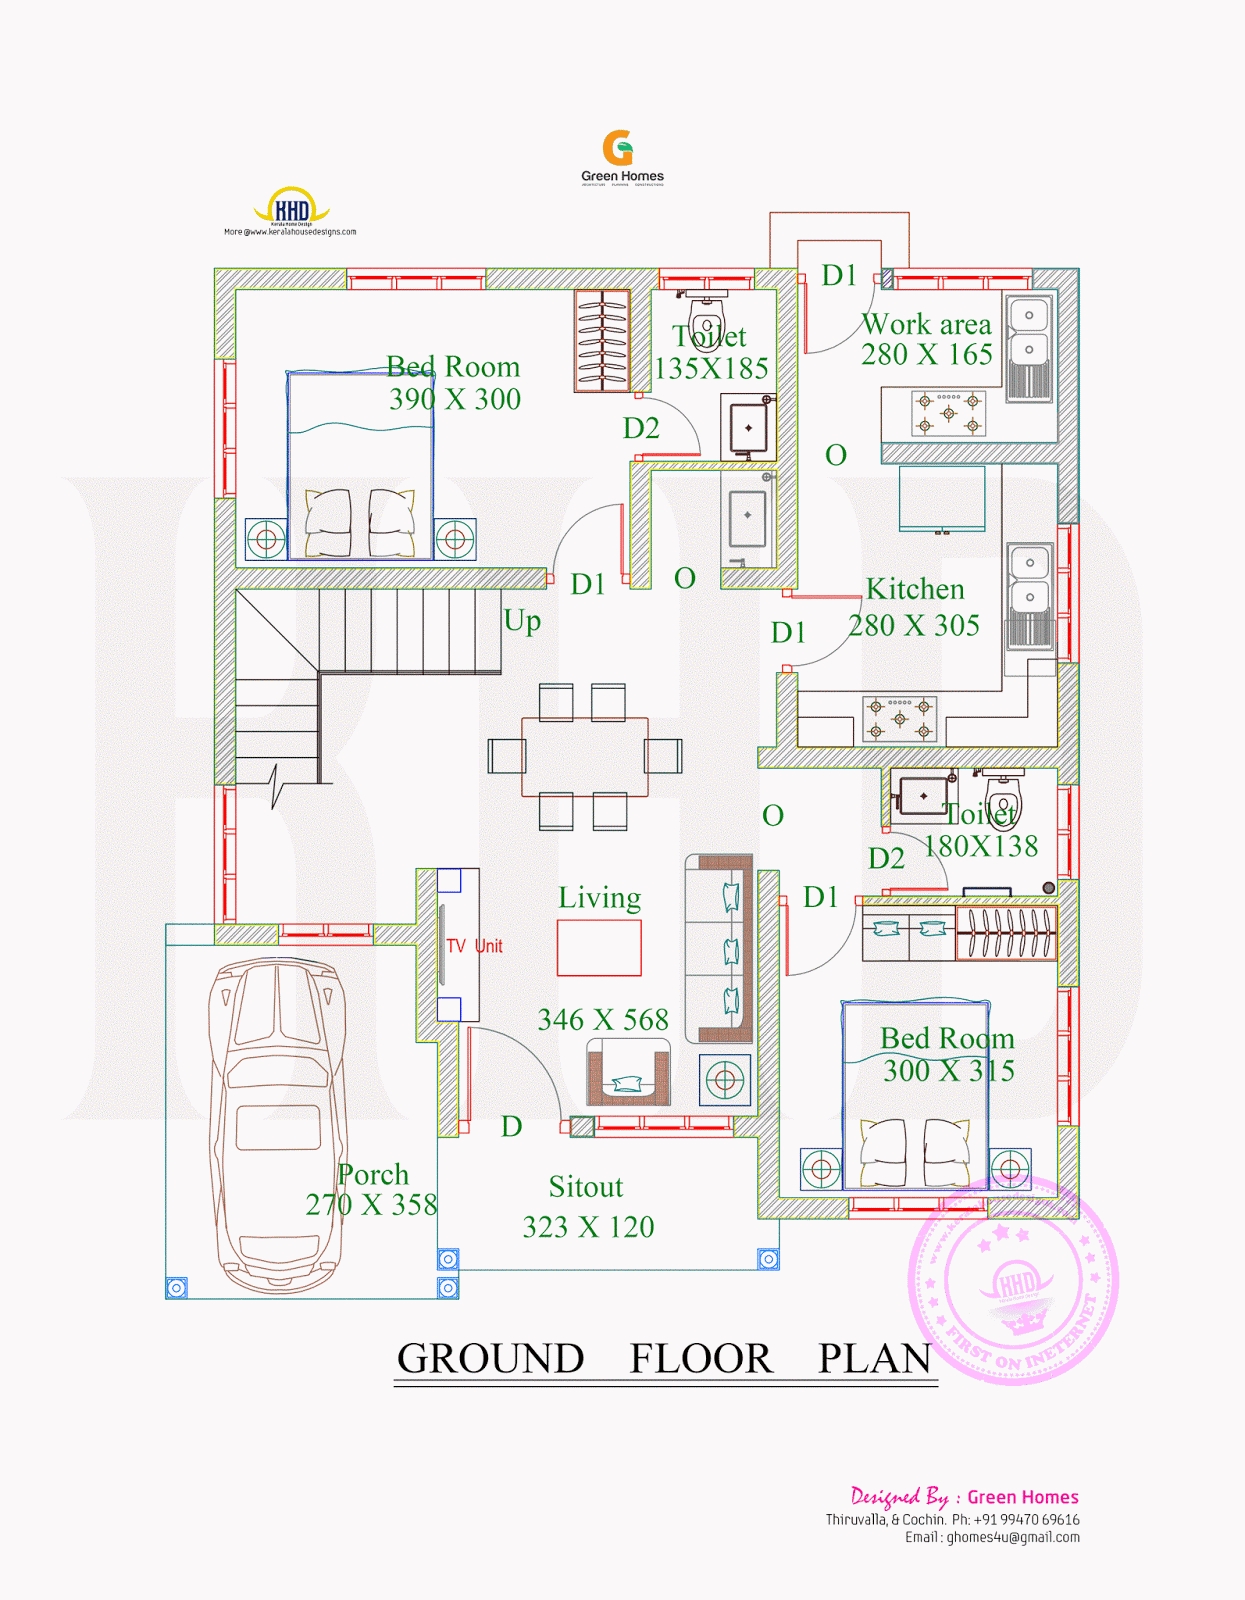 Picture of 2715 square feet house with full sketch floor plangreen homes intended for exquisite house plans in 2 cents